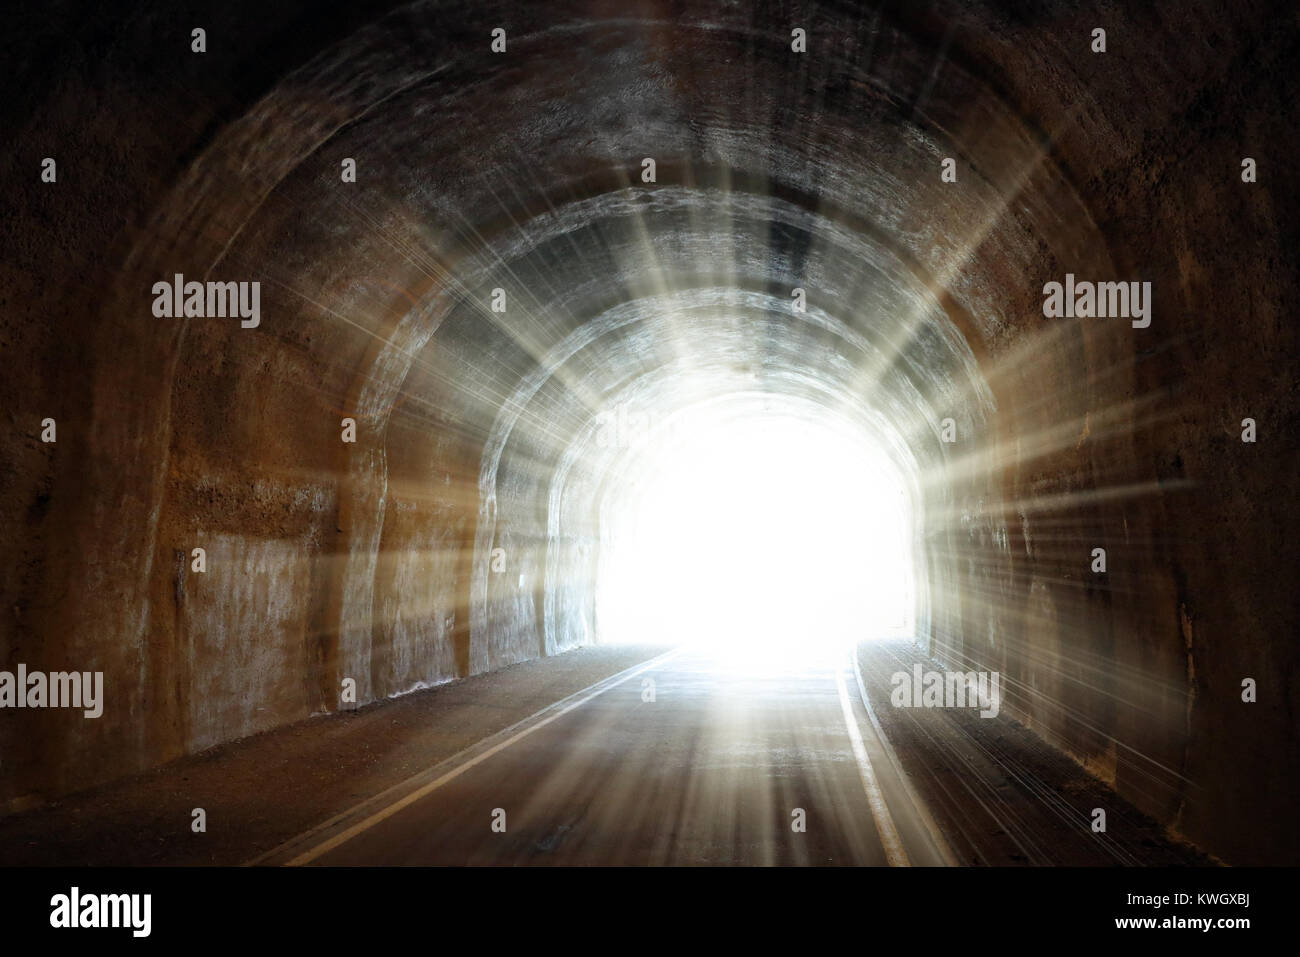 Shining light at the end of the tunnel Stock Photo